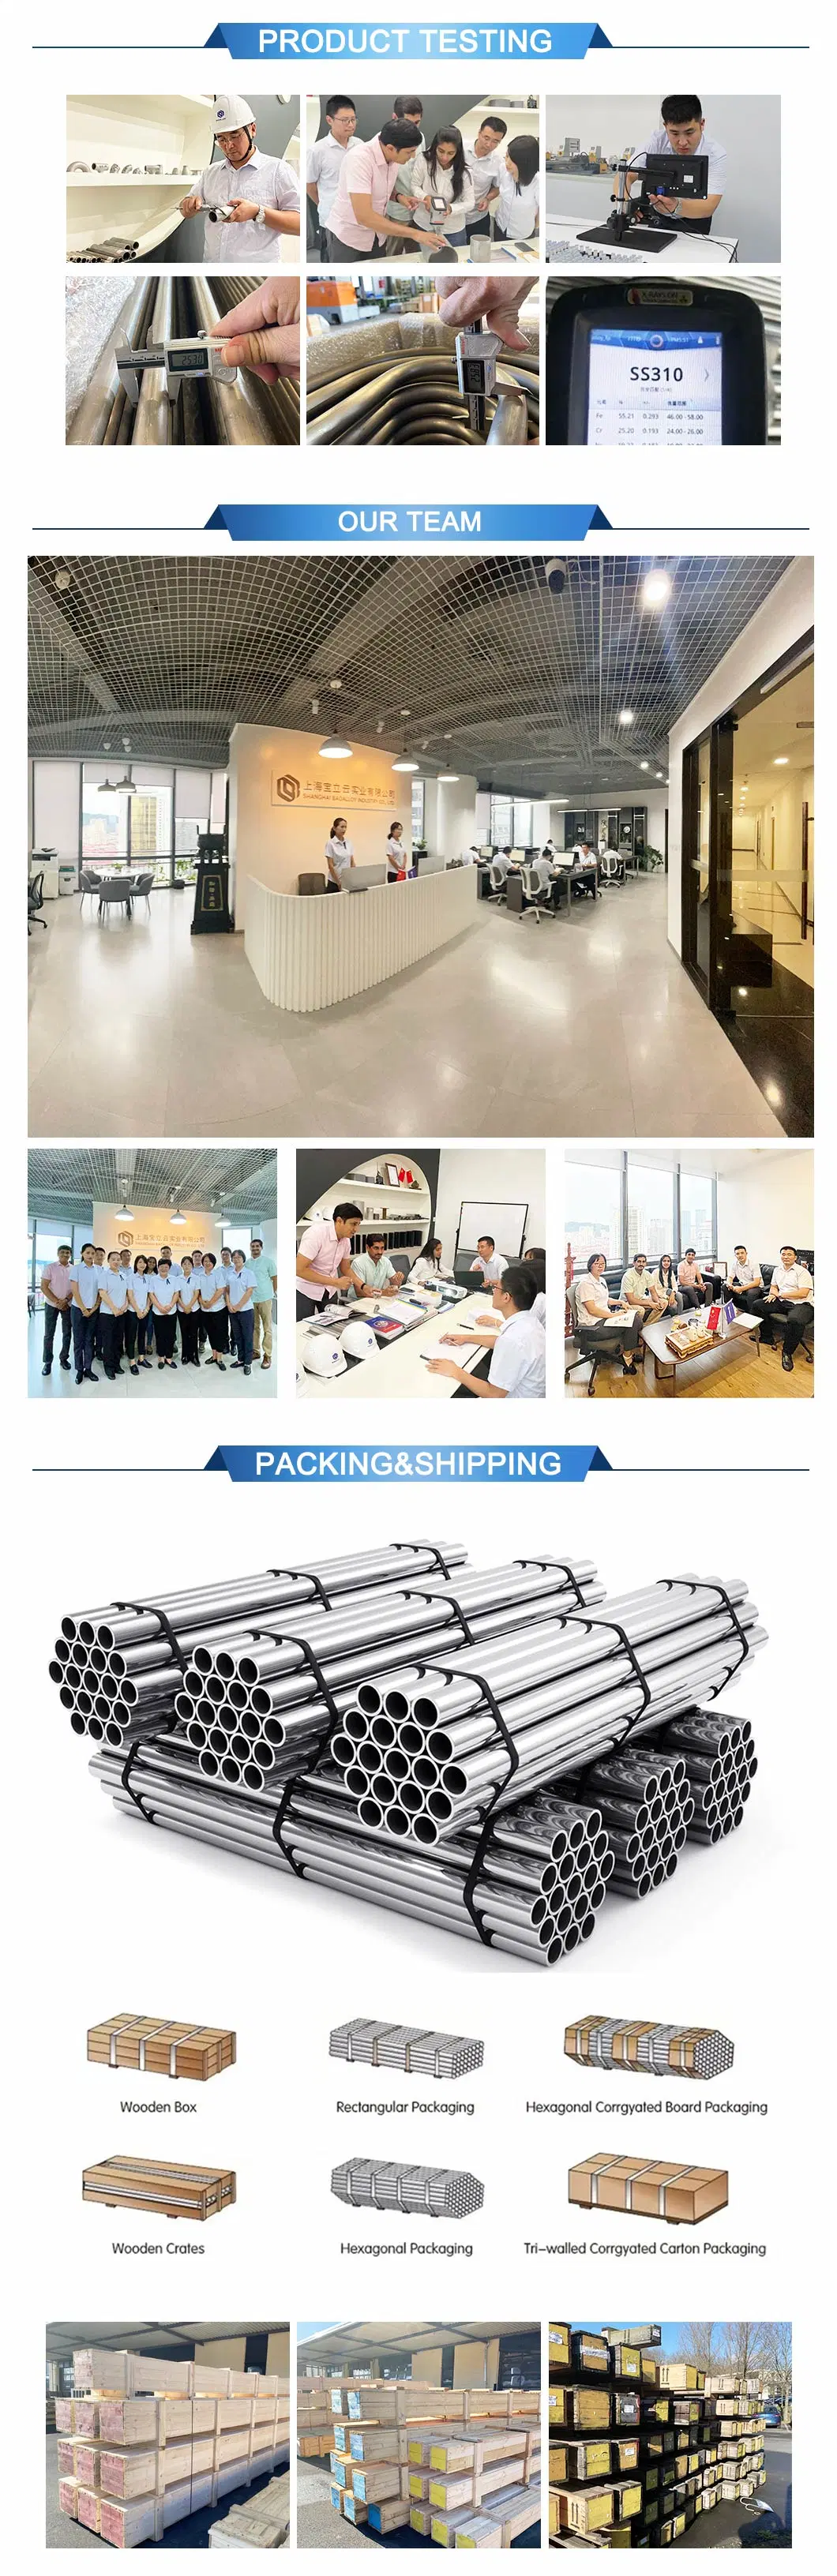 SUS304 1.4301 Round Pipe Stainless Steel Pipe Stainless Steel Tube 304 Pipe